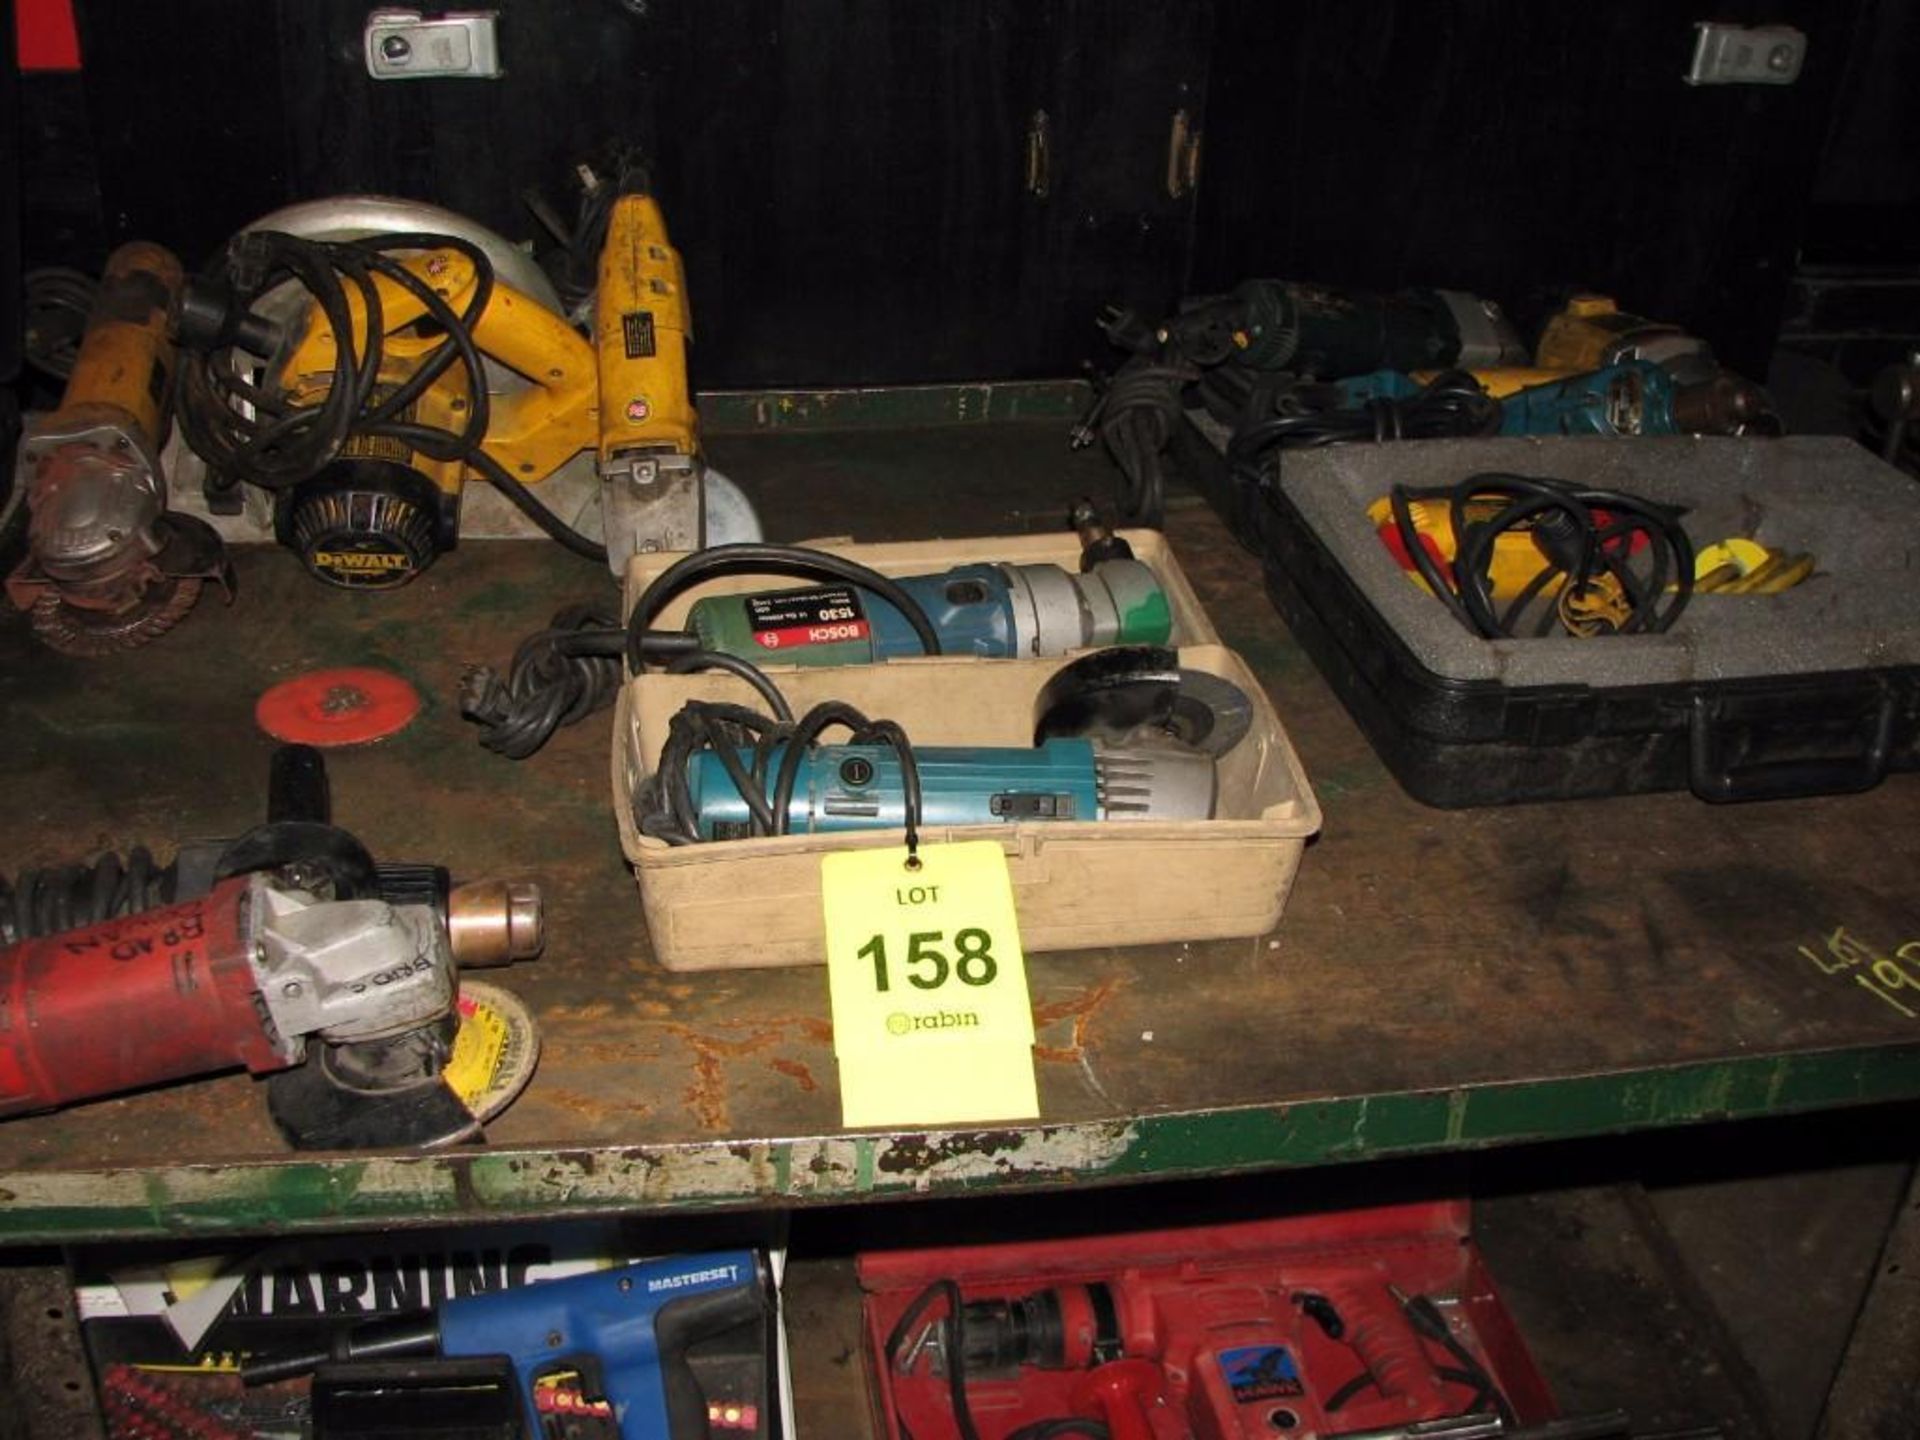 [Lot] Power tools including drills, angle grinders, circular saw, impact wrench